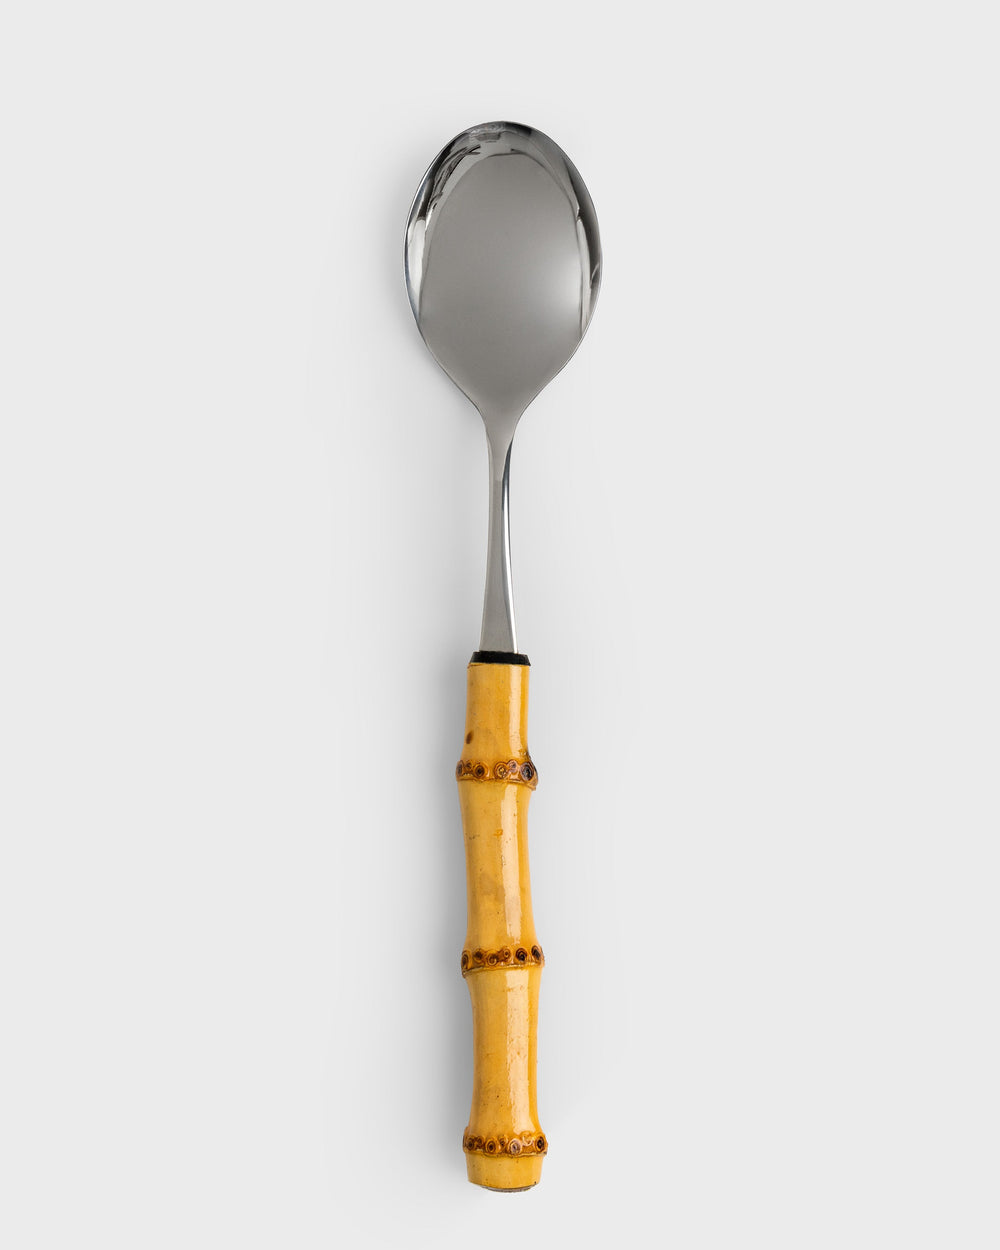 Tania Bulhoes Serving Spoon Angra Stainless Steel Bamboo